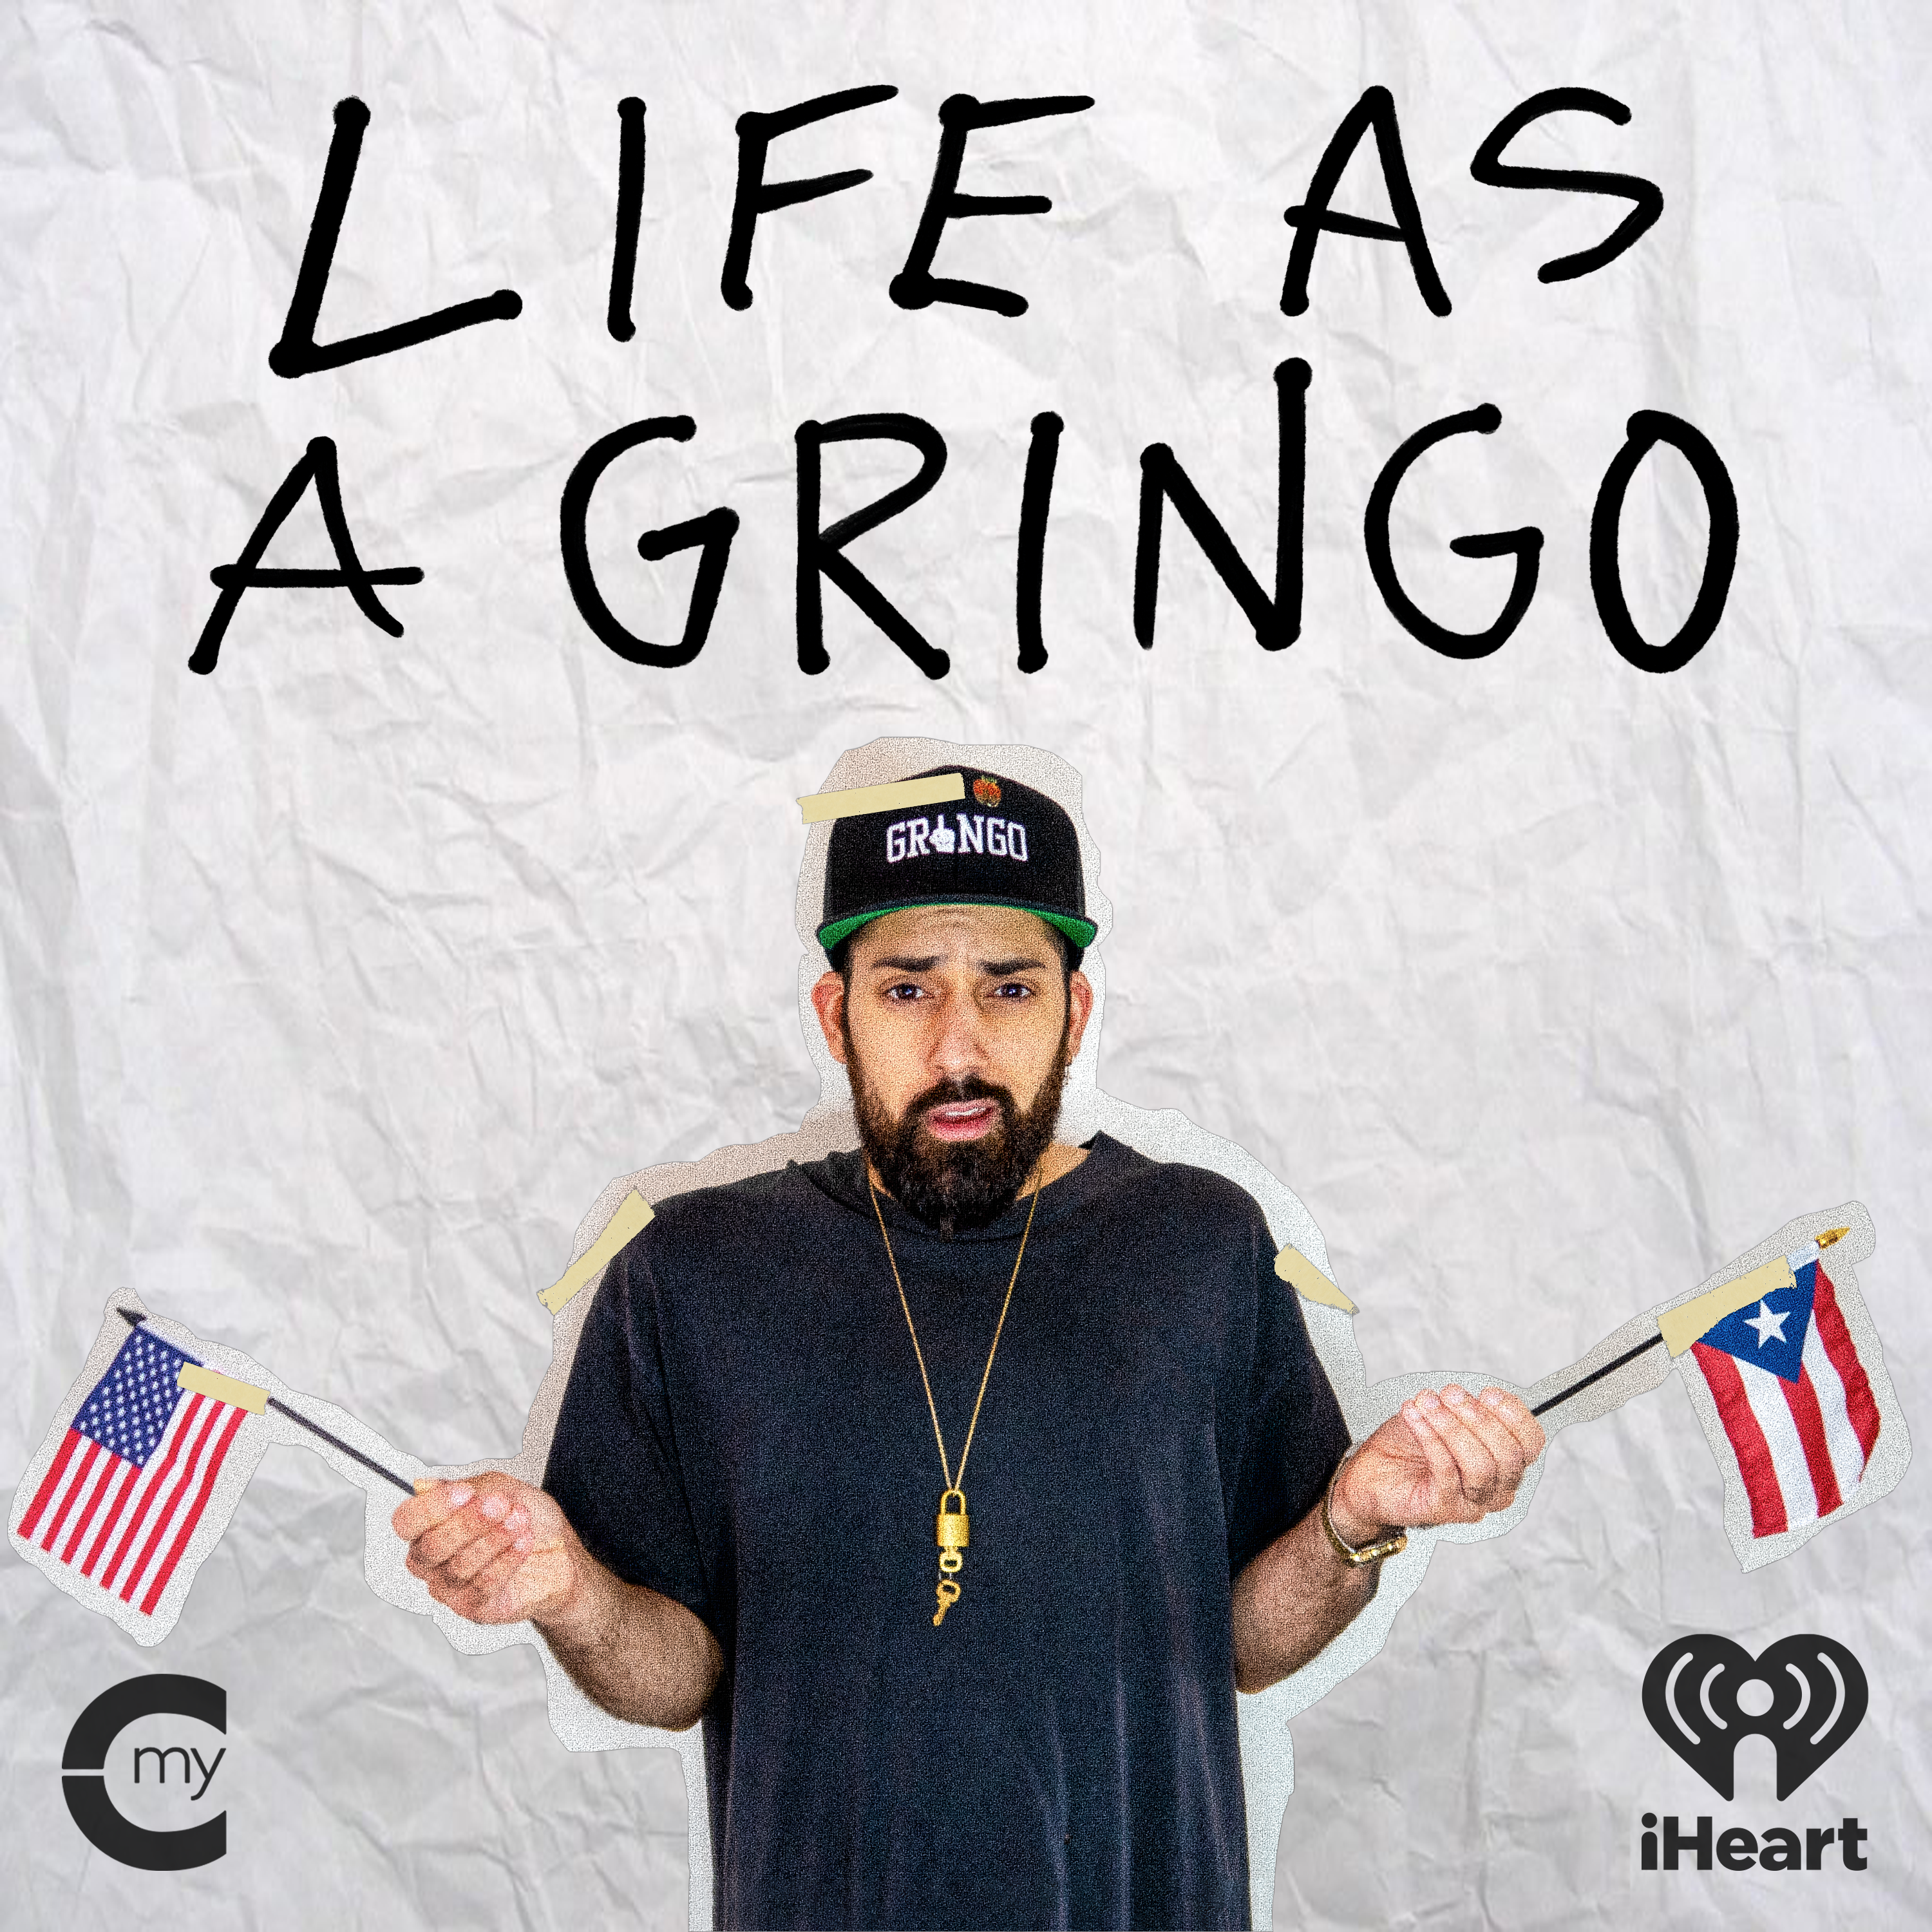 Gringo's Guide To: Gratitude & Not Taking Life For Granted